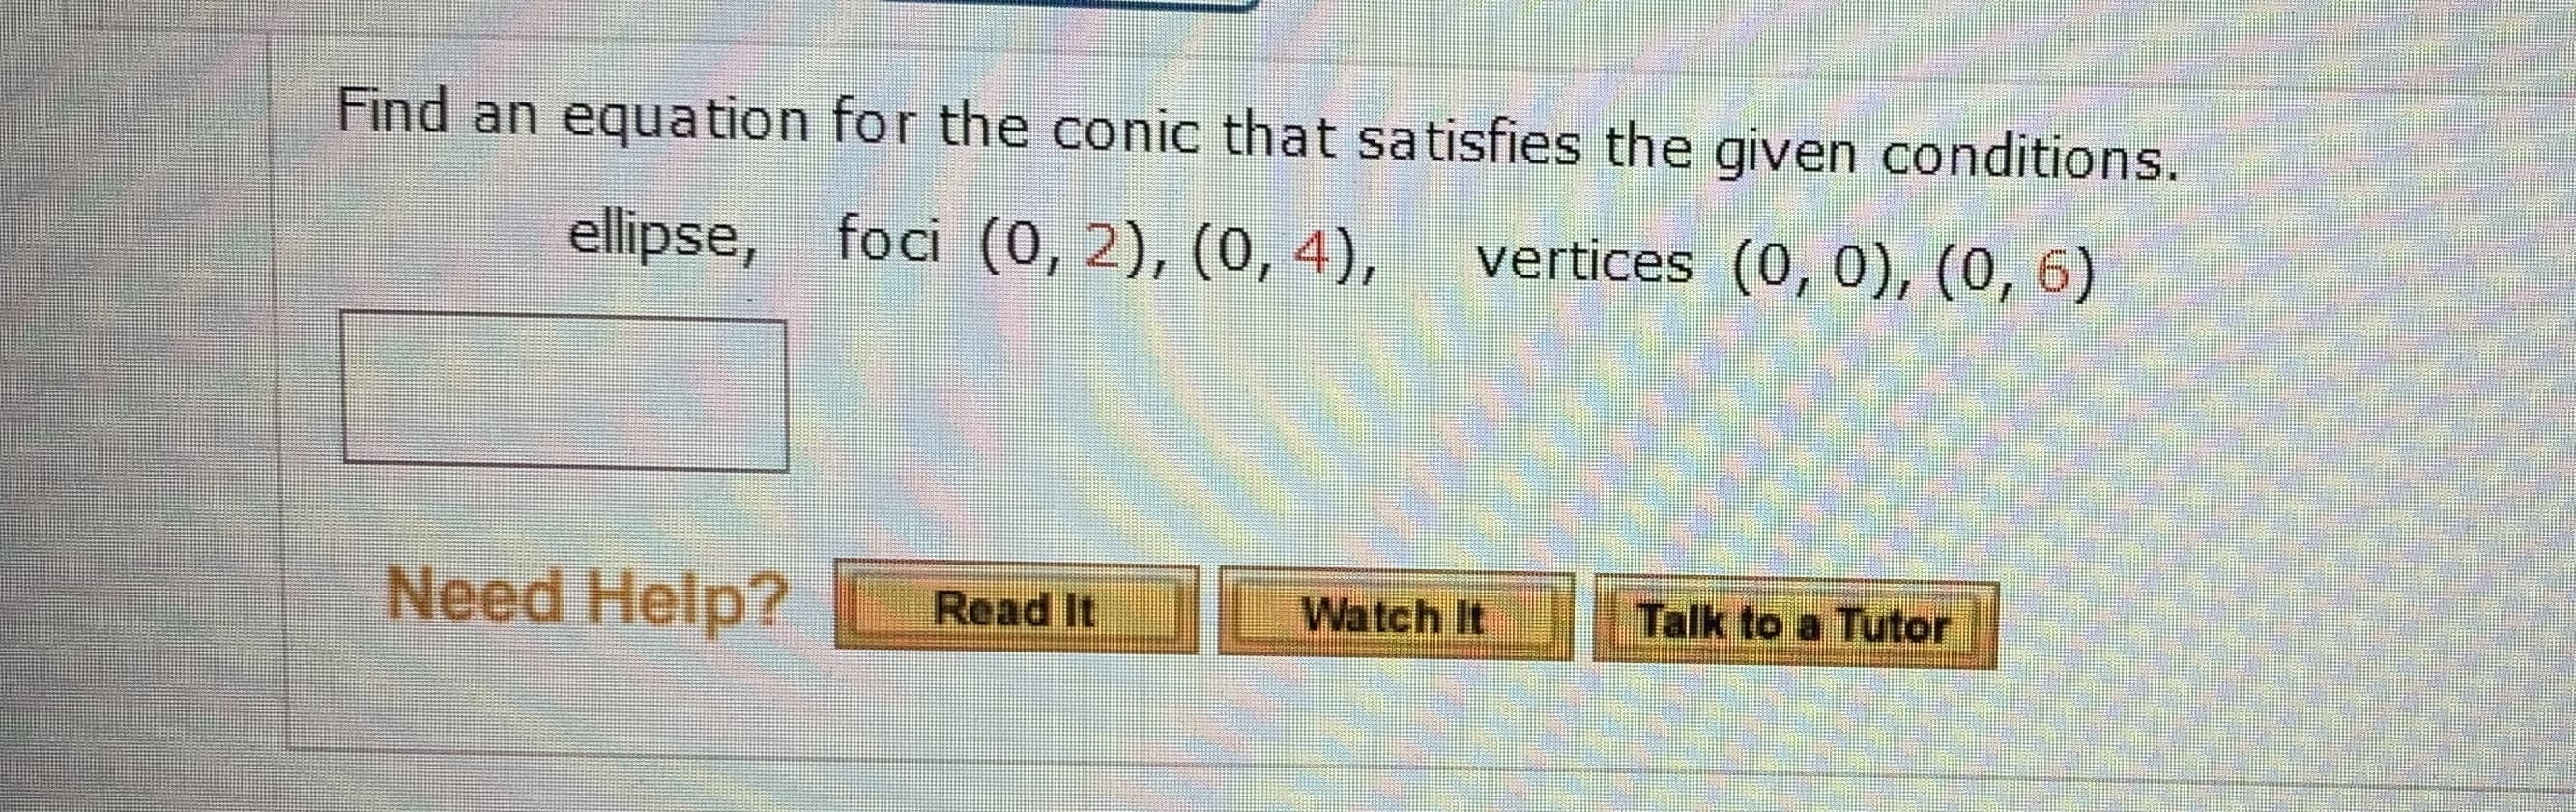 Find an equation for the conic that satisfies the given conditions.
ellipse, foci (0, 2), (0, 4),
vertices (0, 0), (0, 6)
Need Help?
Talk to a Tutor
Read It
Watch It
